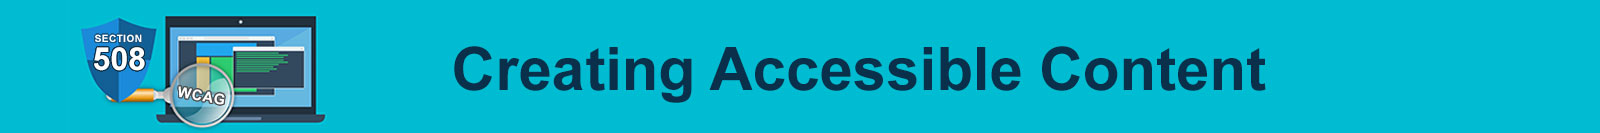 Creating Accessible Content